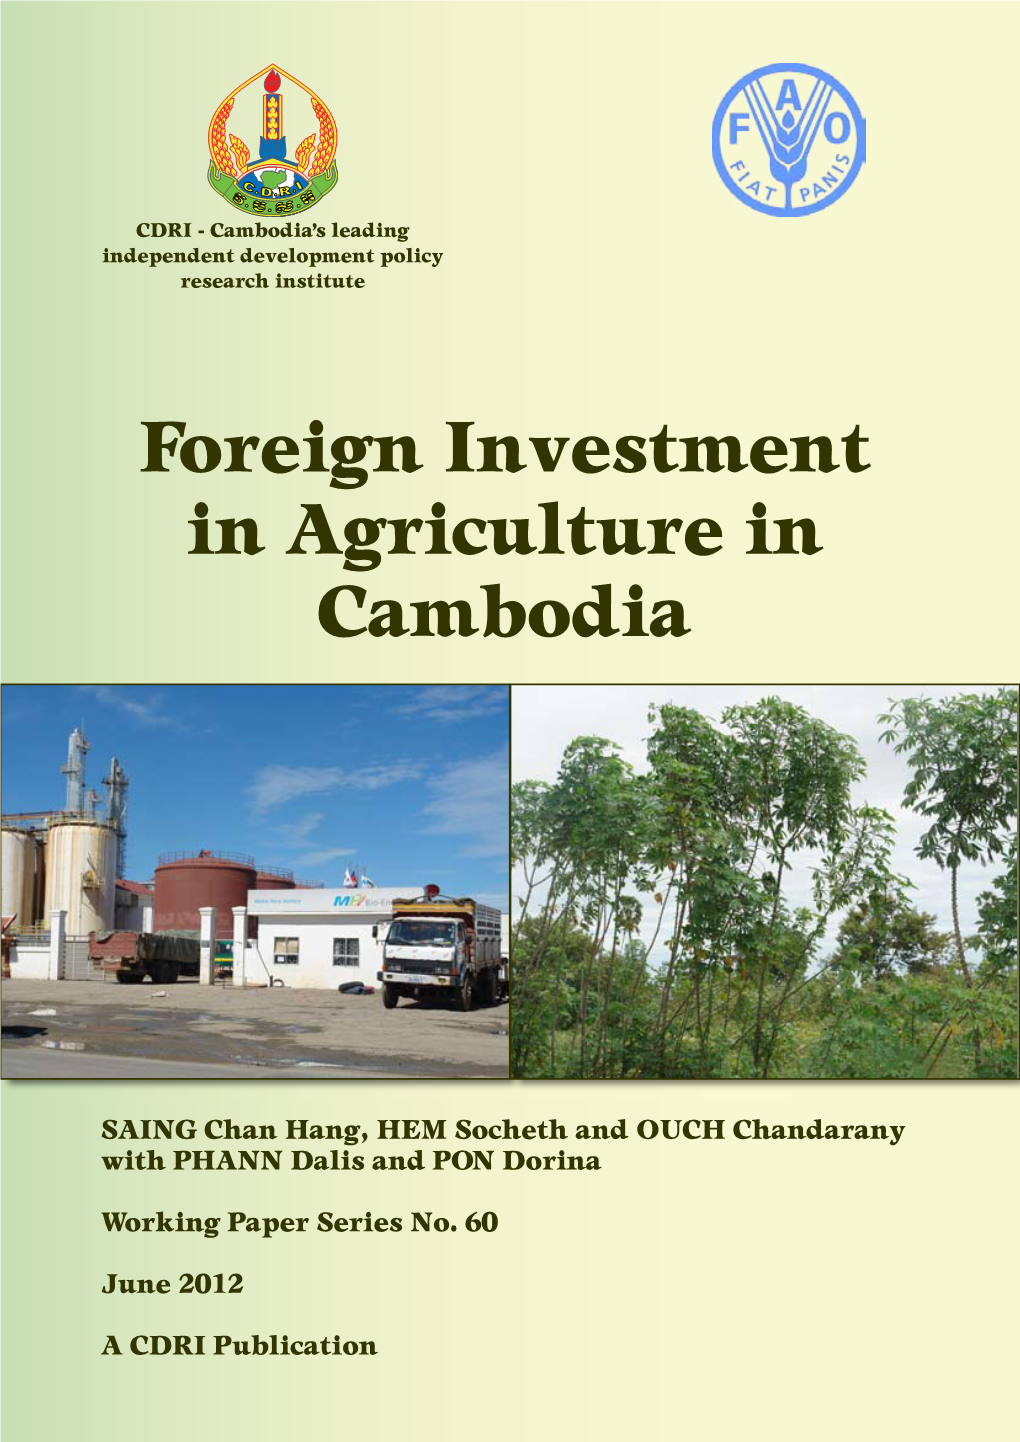 Foreign Investment in Agriculture in Cambodia